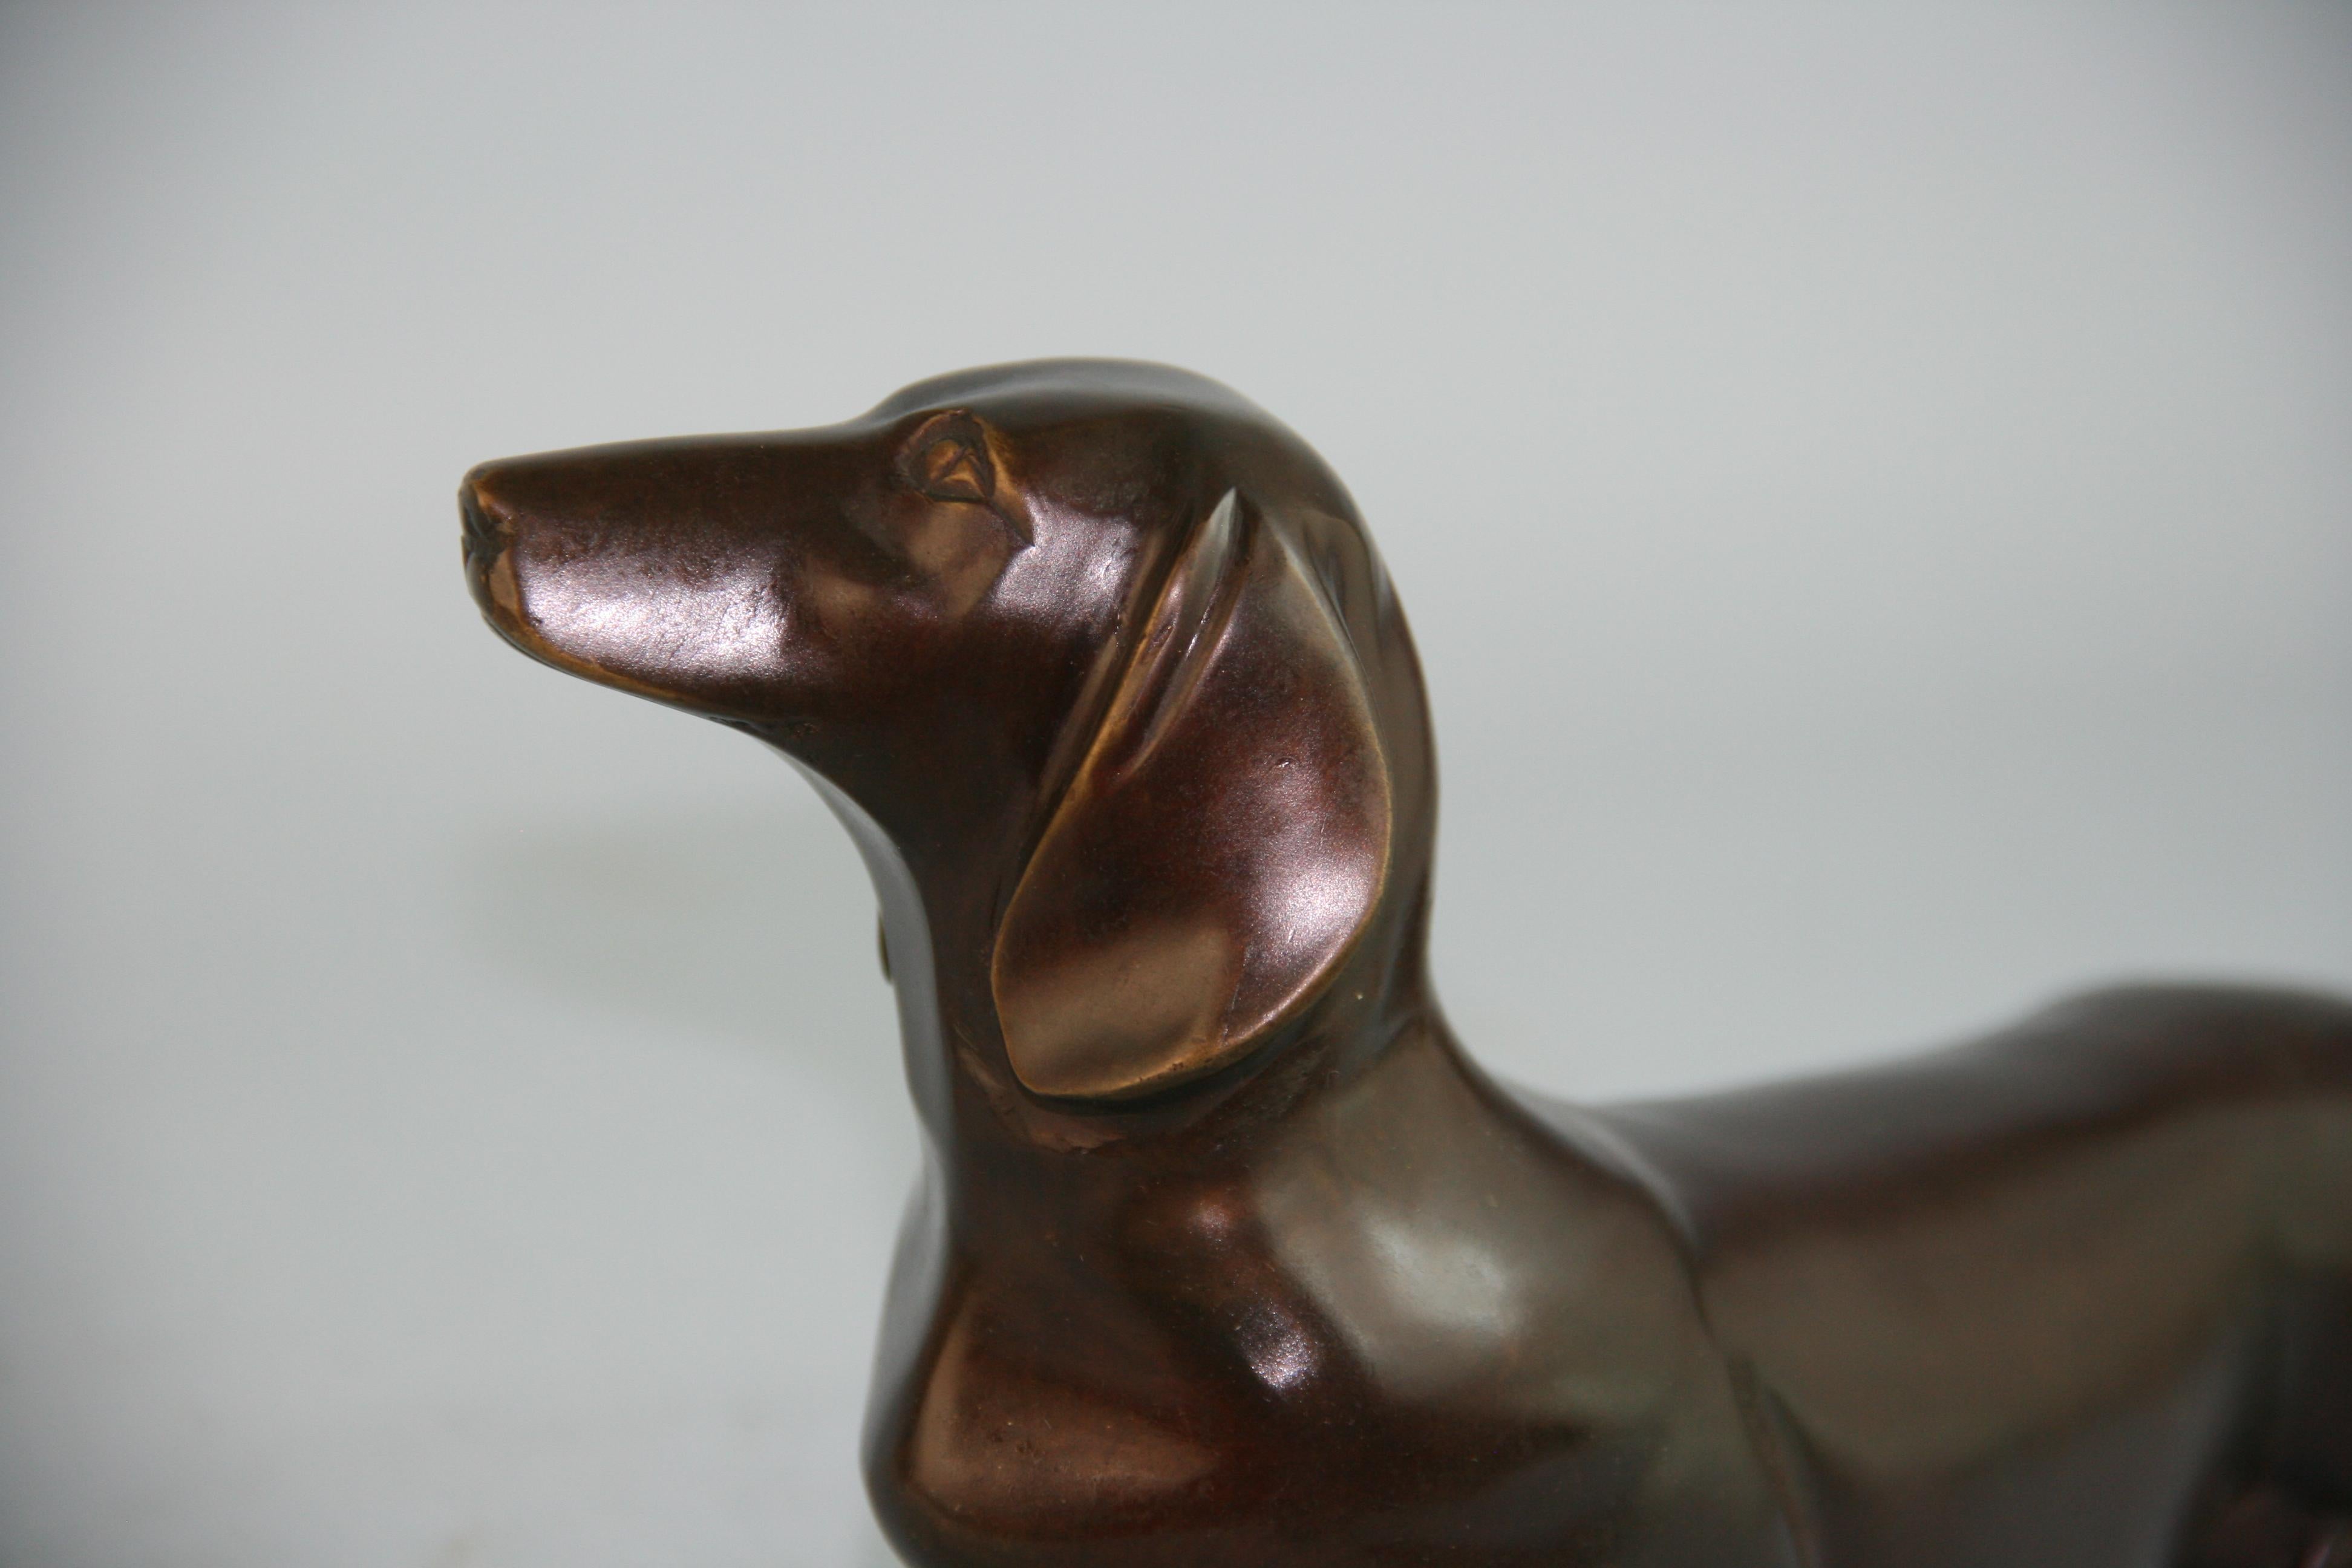 Late 20th Century Japanese Cast bronze sculpture of a Dachshund Dog